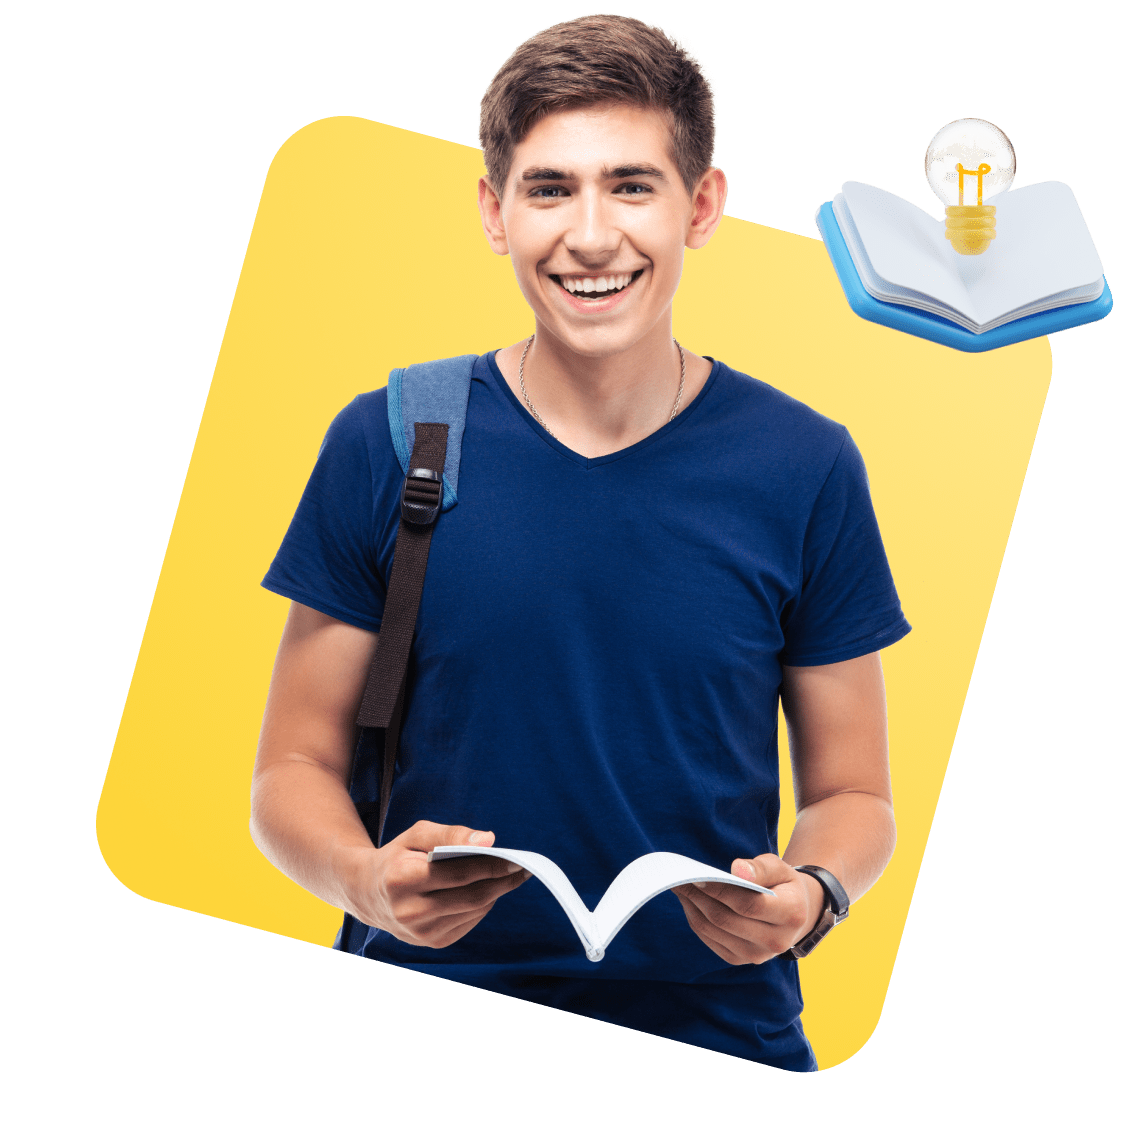 Florida Online Schools image 9 (name 4 Young Man Open Book Light)